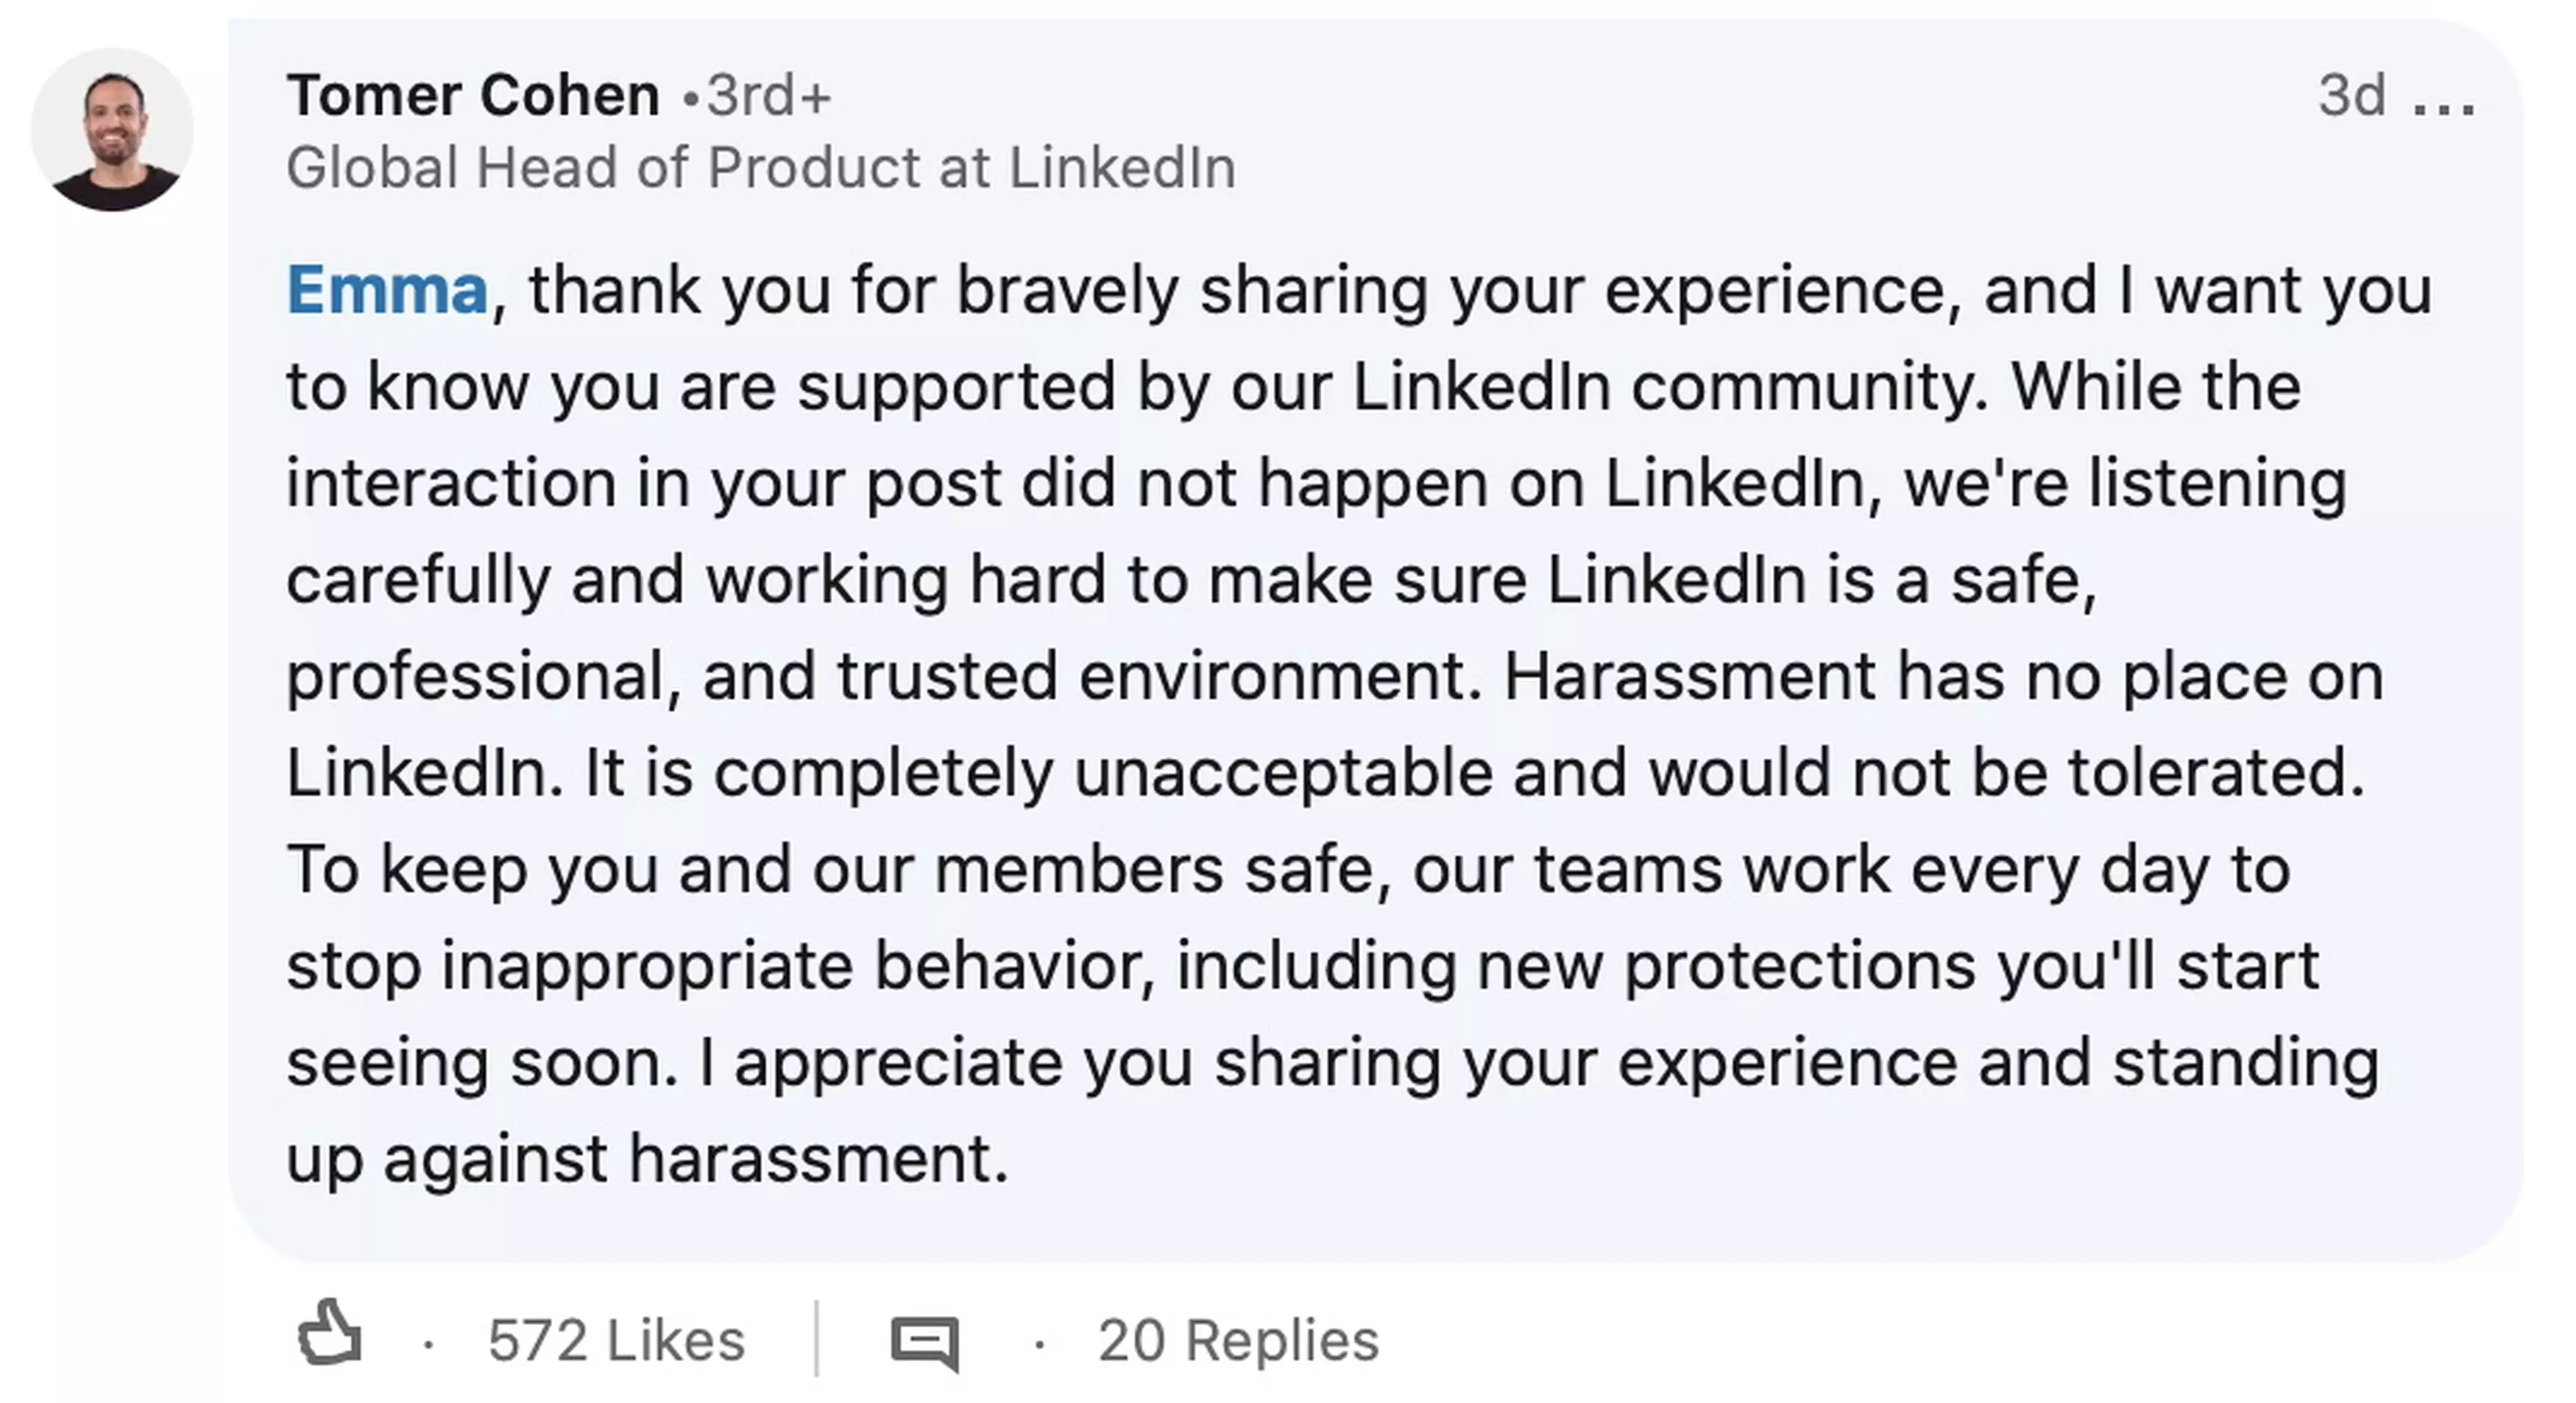 LinkedIn's Global Head of Product Tomer Cohen called his actions 'unacceptable' (